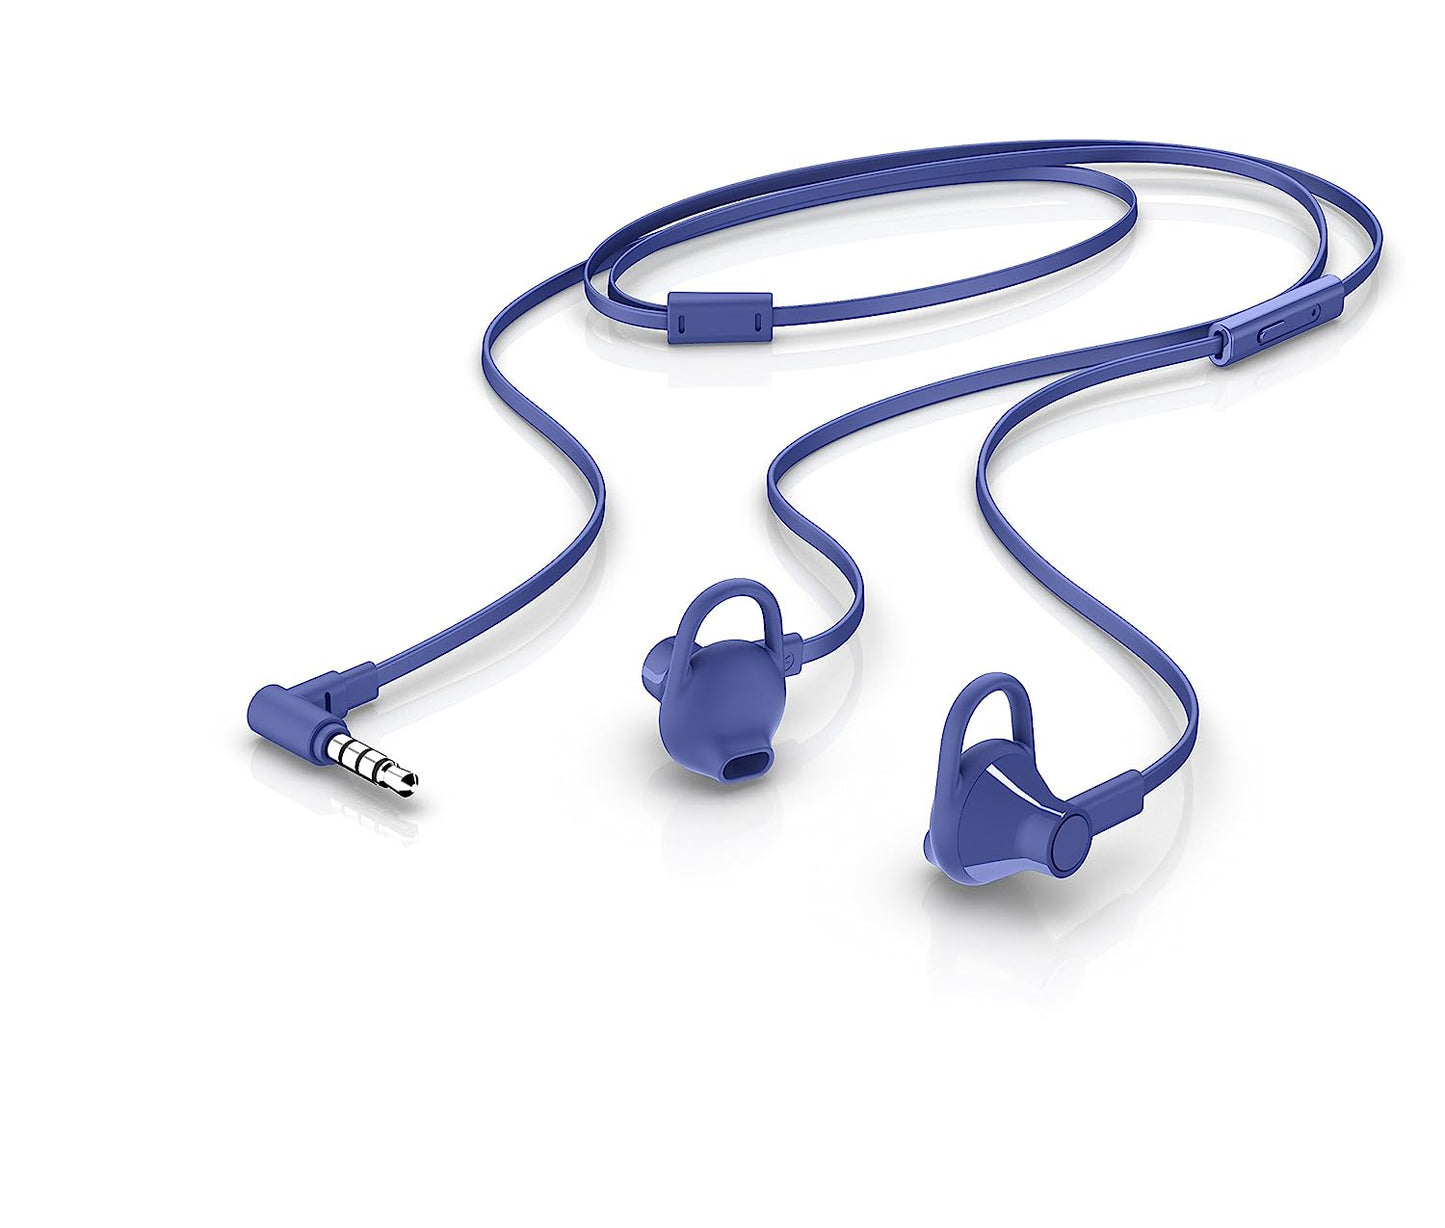 HP 150 Wired in-Ear Earphones with Mic and Powerful Bass (Blue)